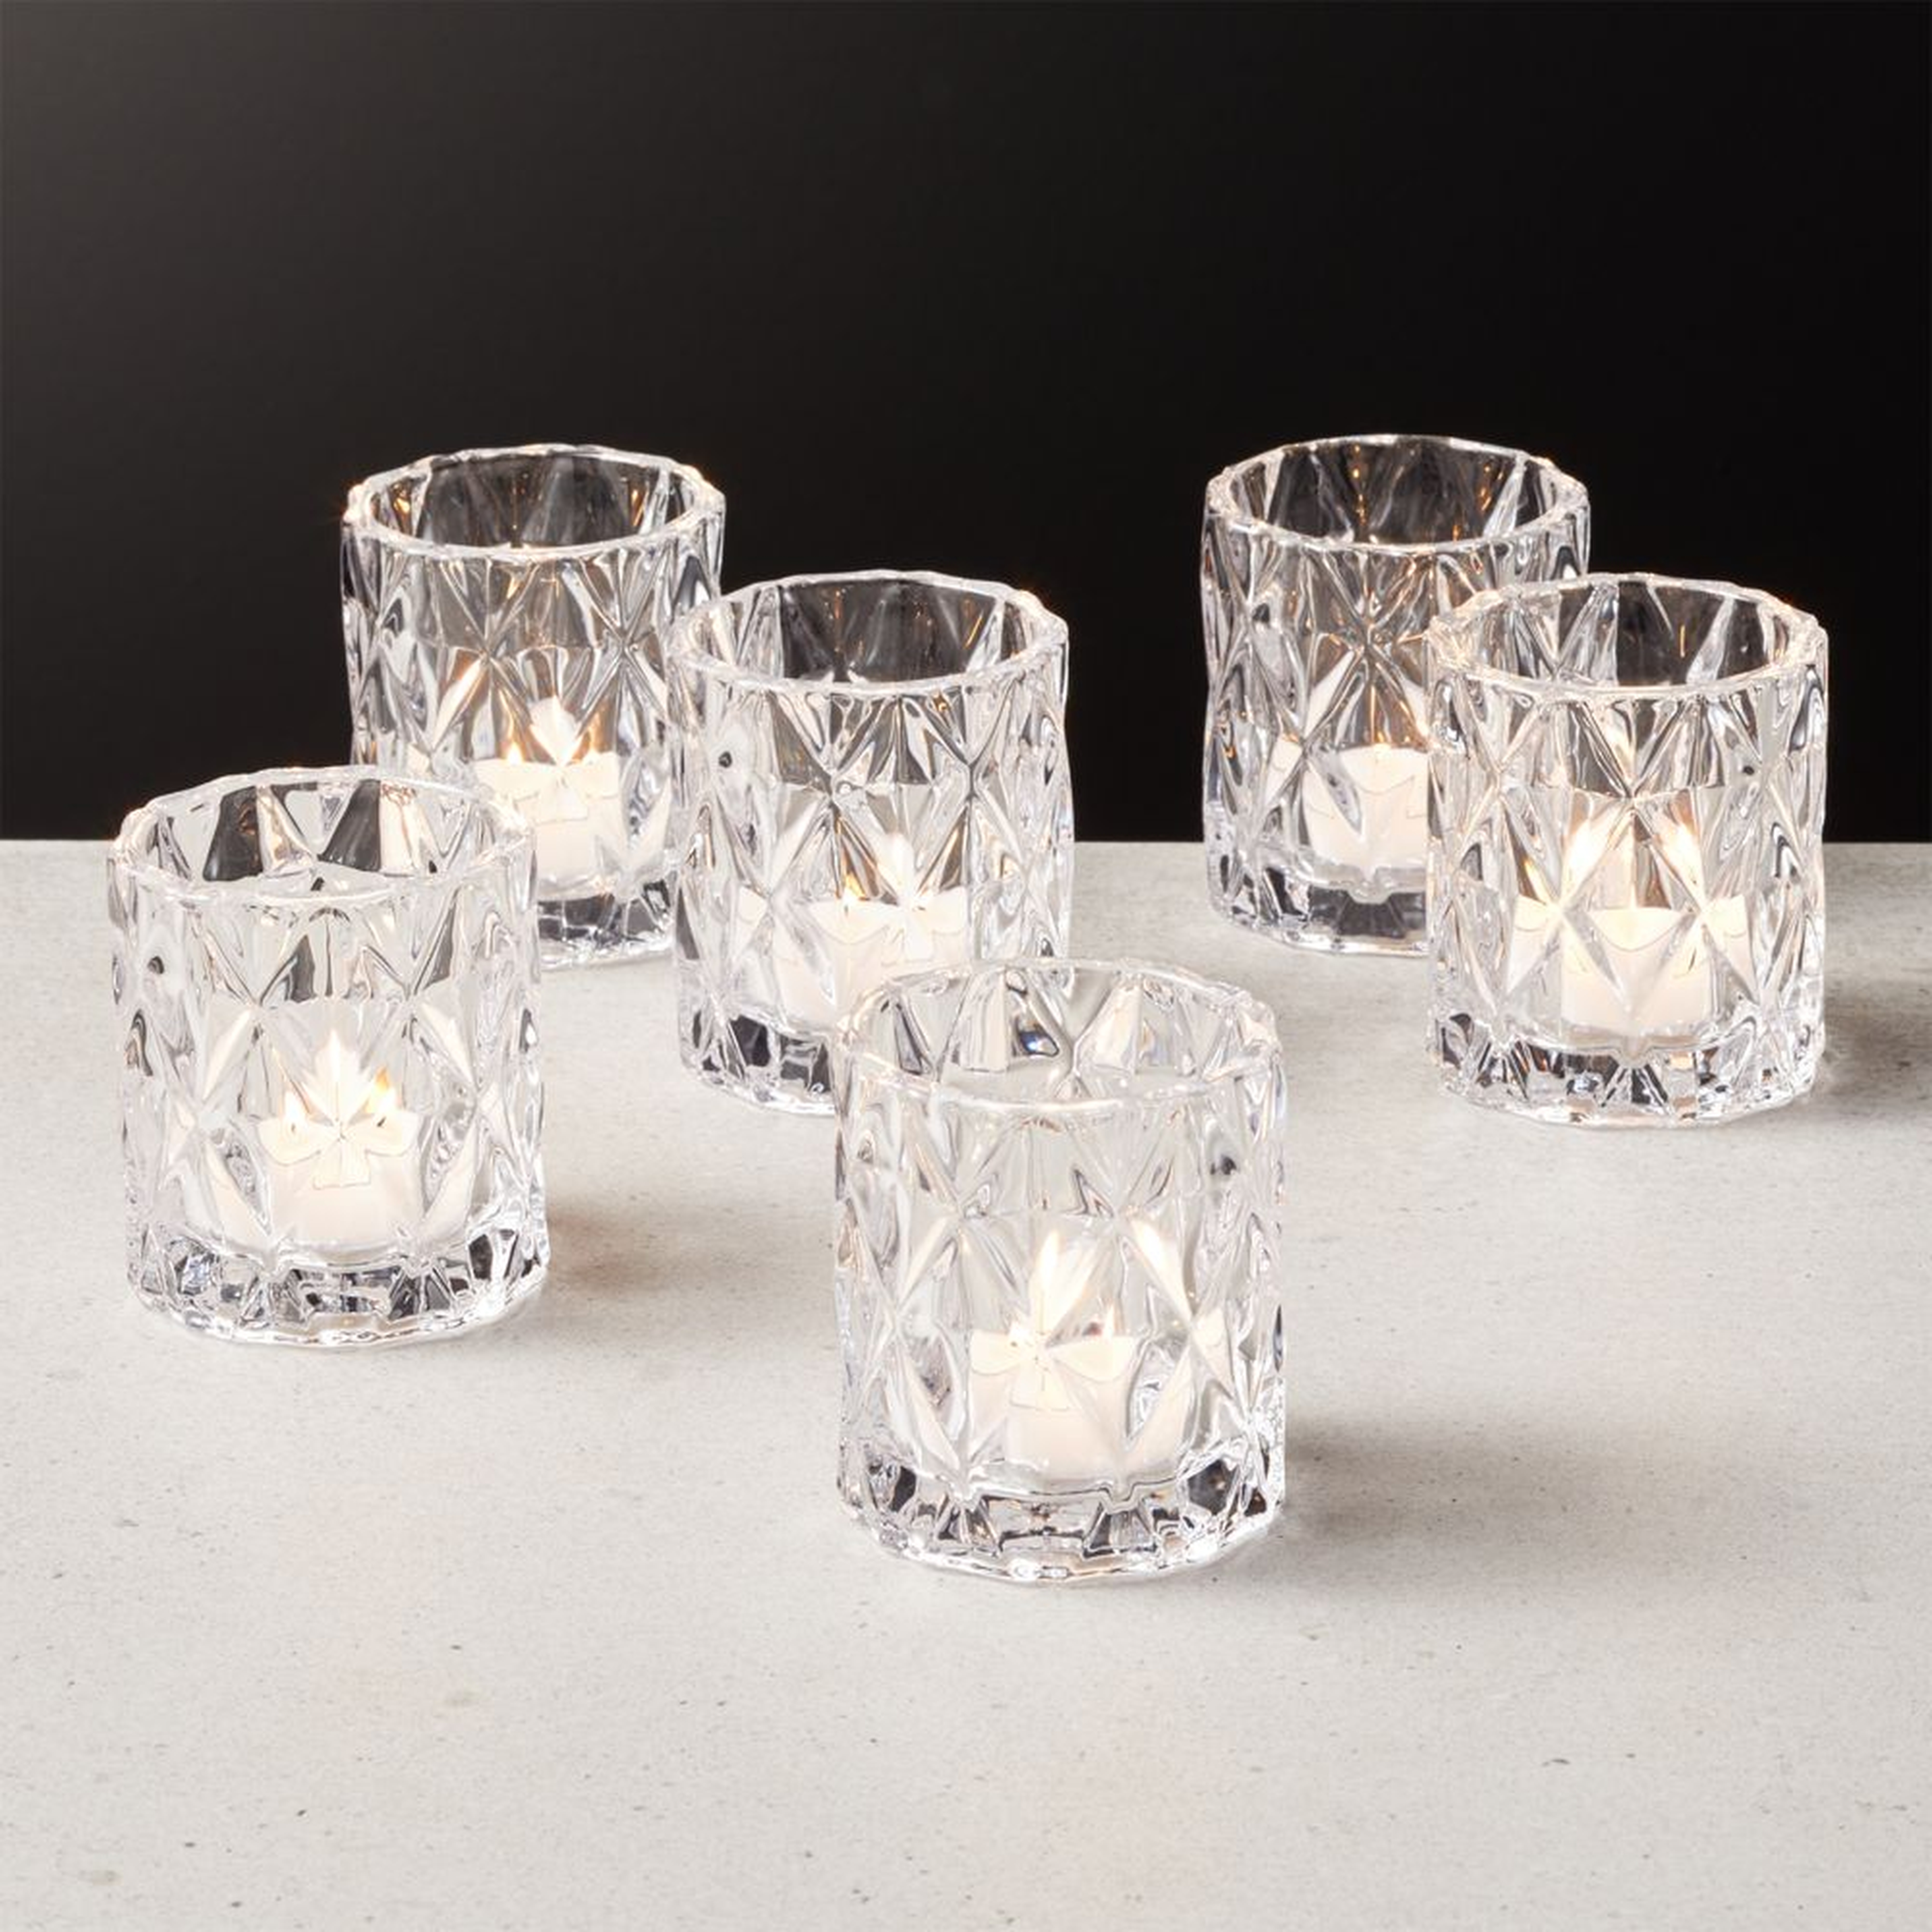 Betty Glass Tealight Candle Holder Set of 6 - CB2